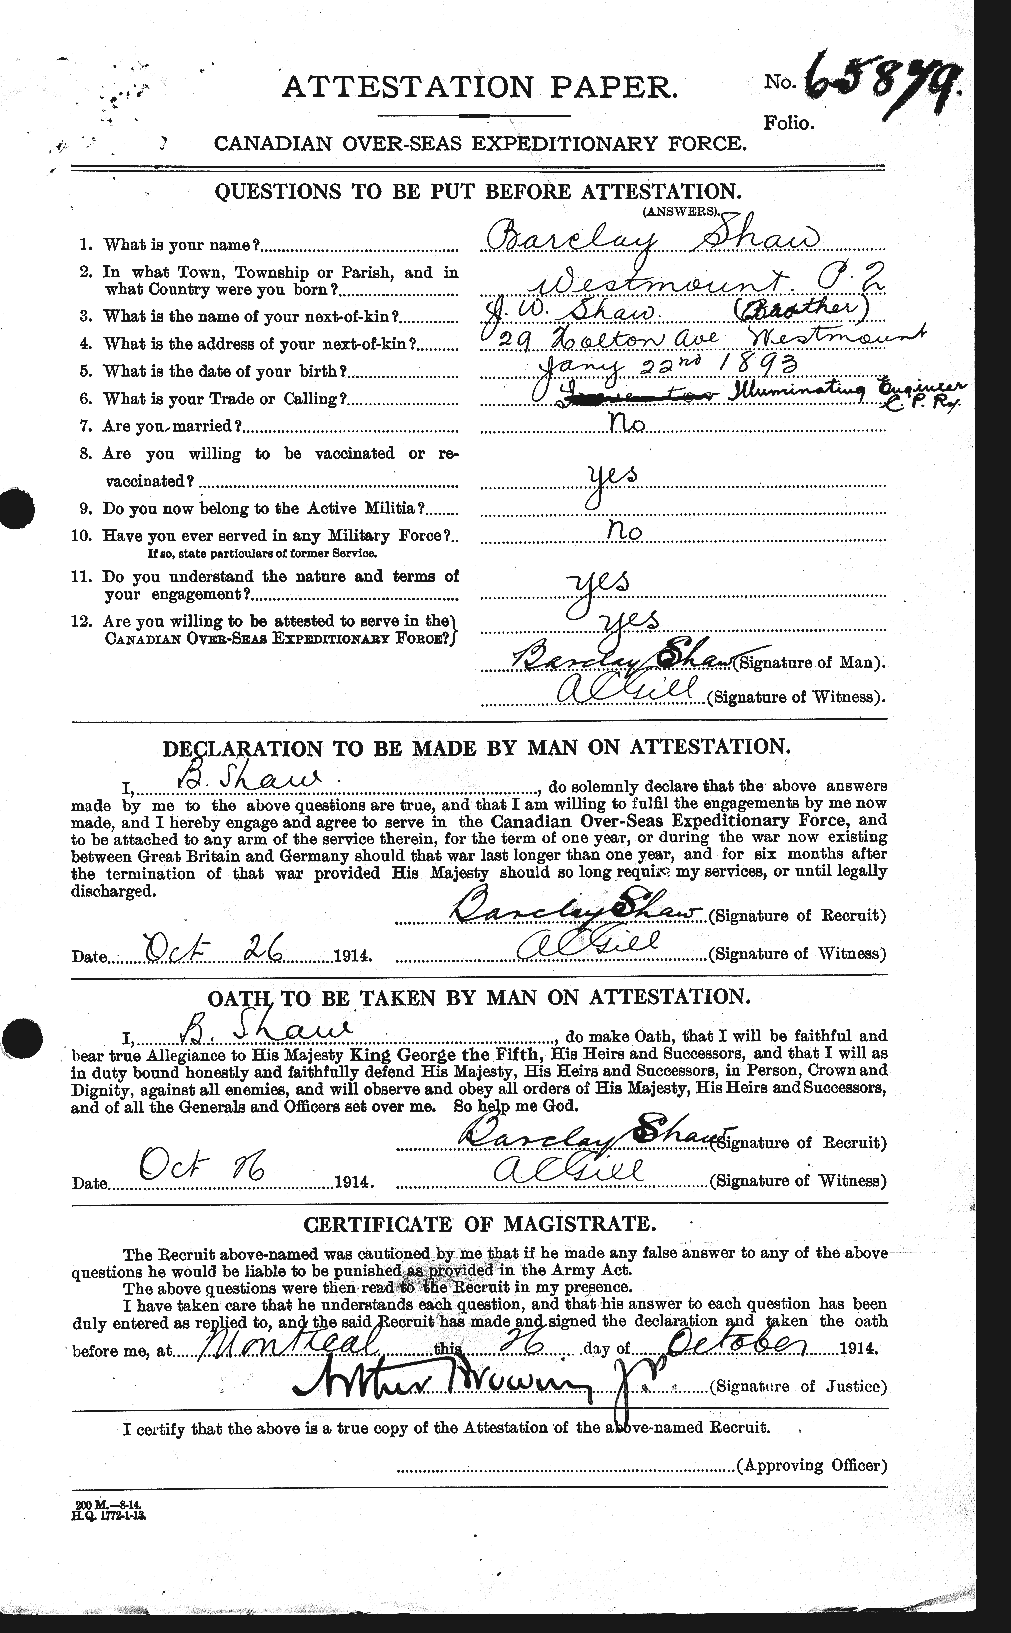 Personnel Records of the First World War - CEF 093221a